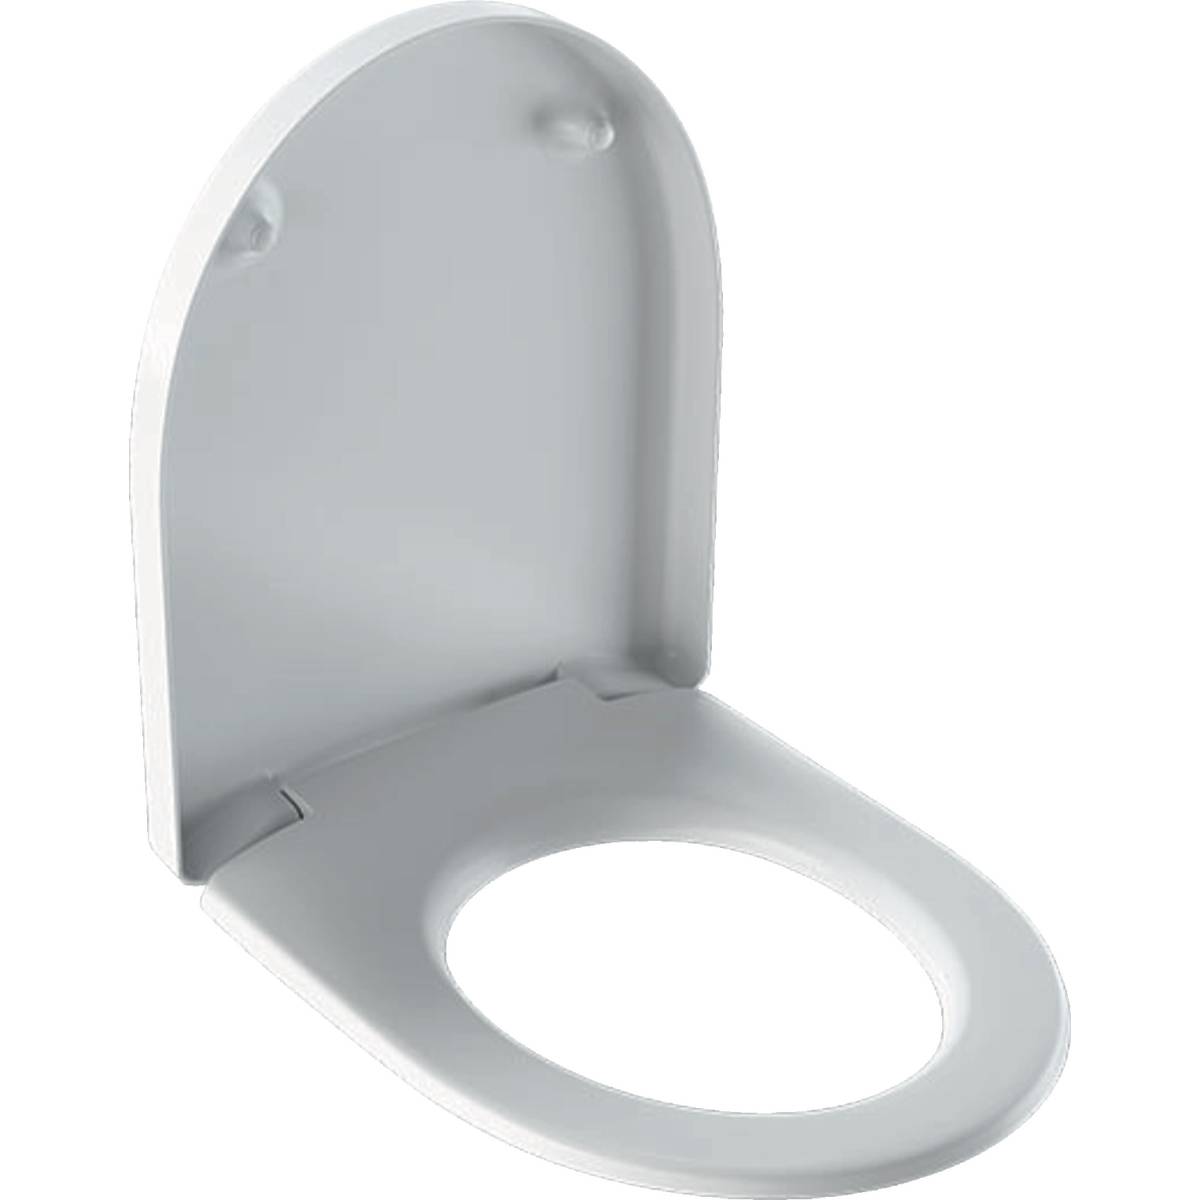 iCon WC Seat